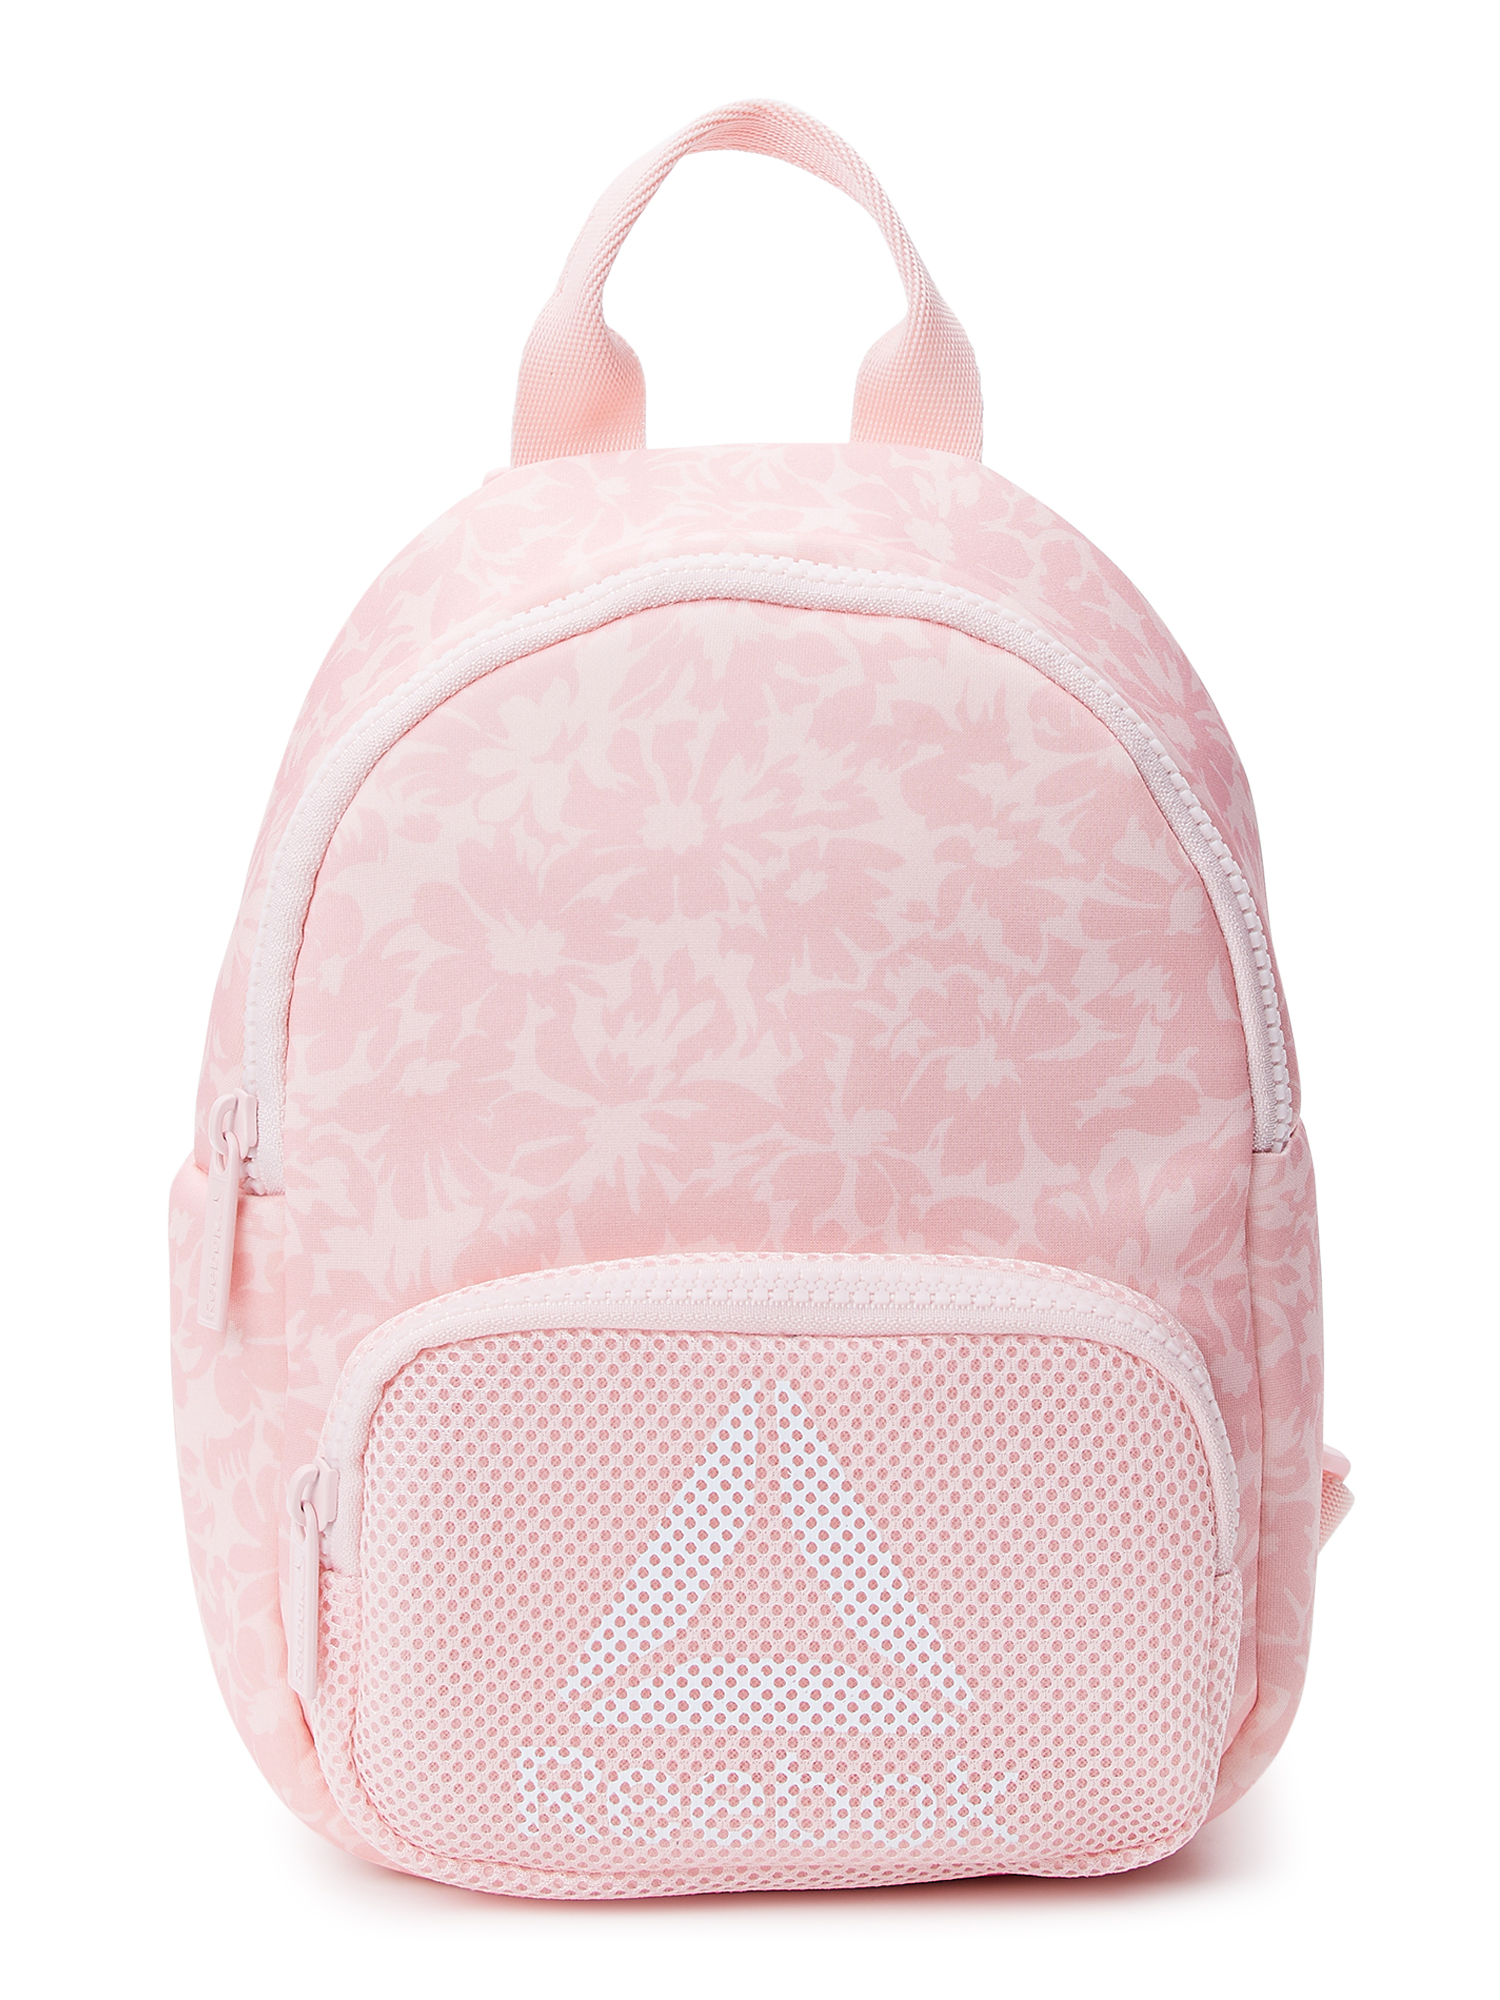 Reebok Women’s Molly Mini Backpack, Rose Daisies - image 1 of 5